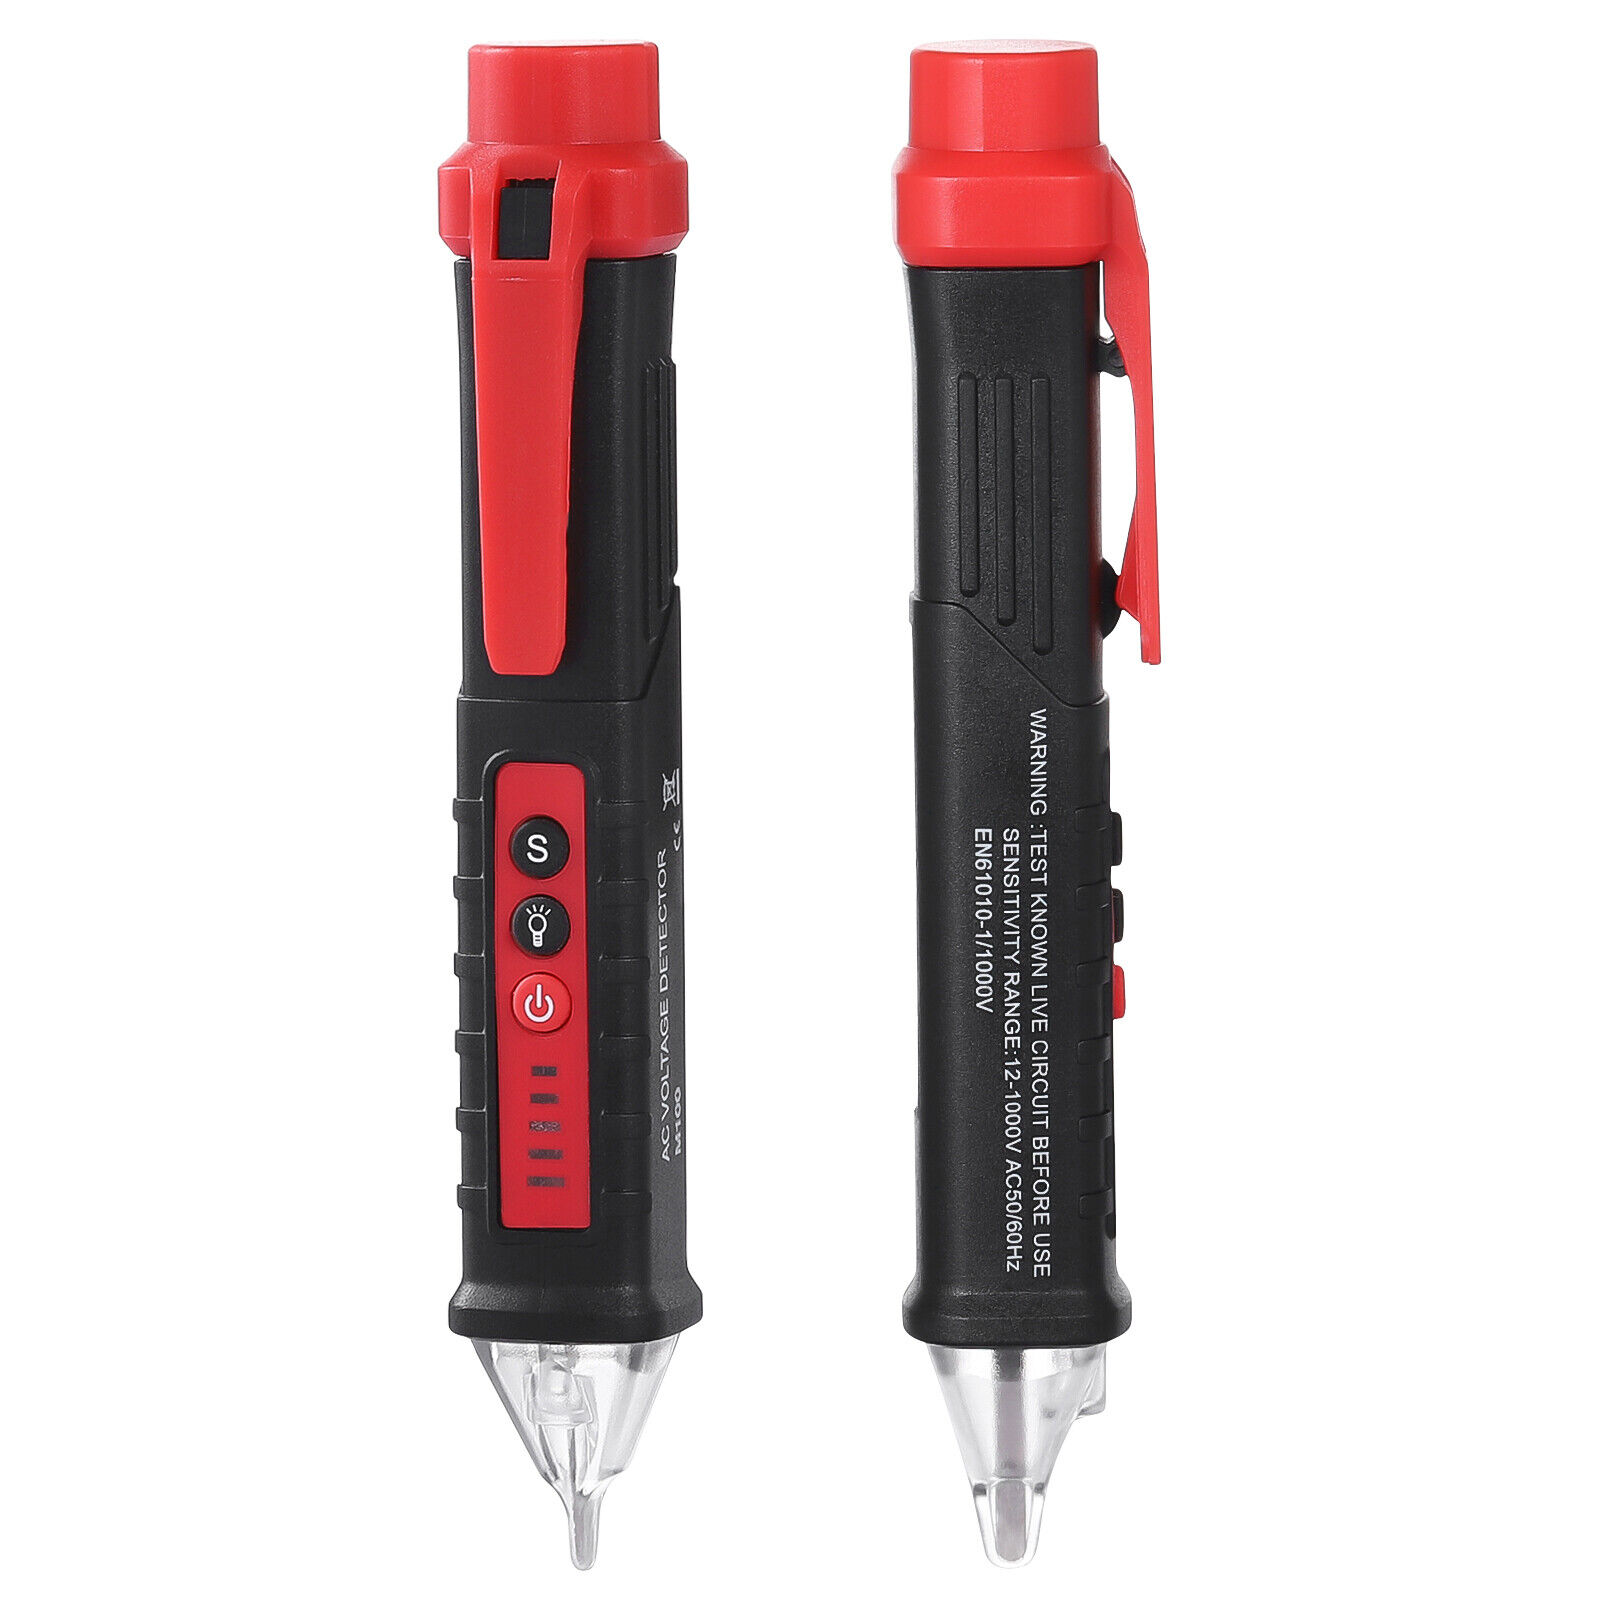 UNI-T 90~1000V Non-Contact AC Electrical Tester Pen Voltage Detector with LED